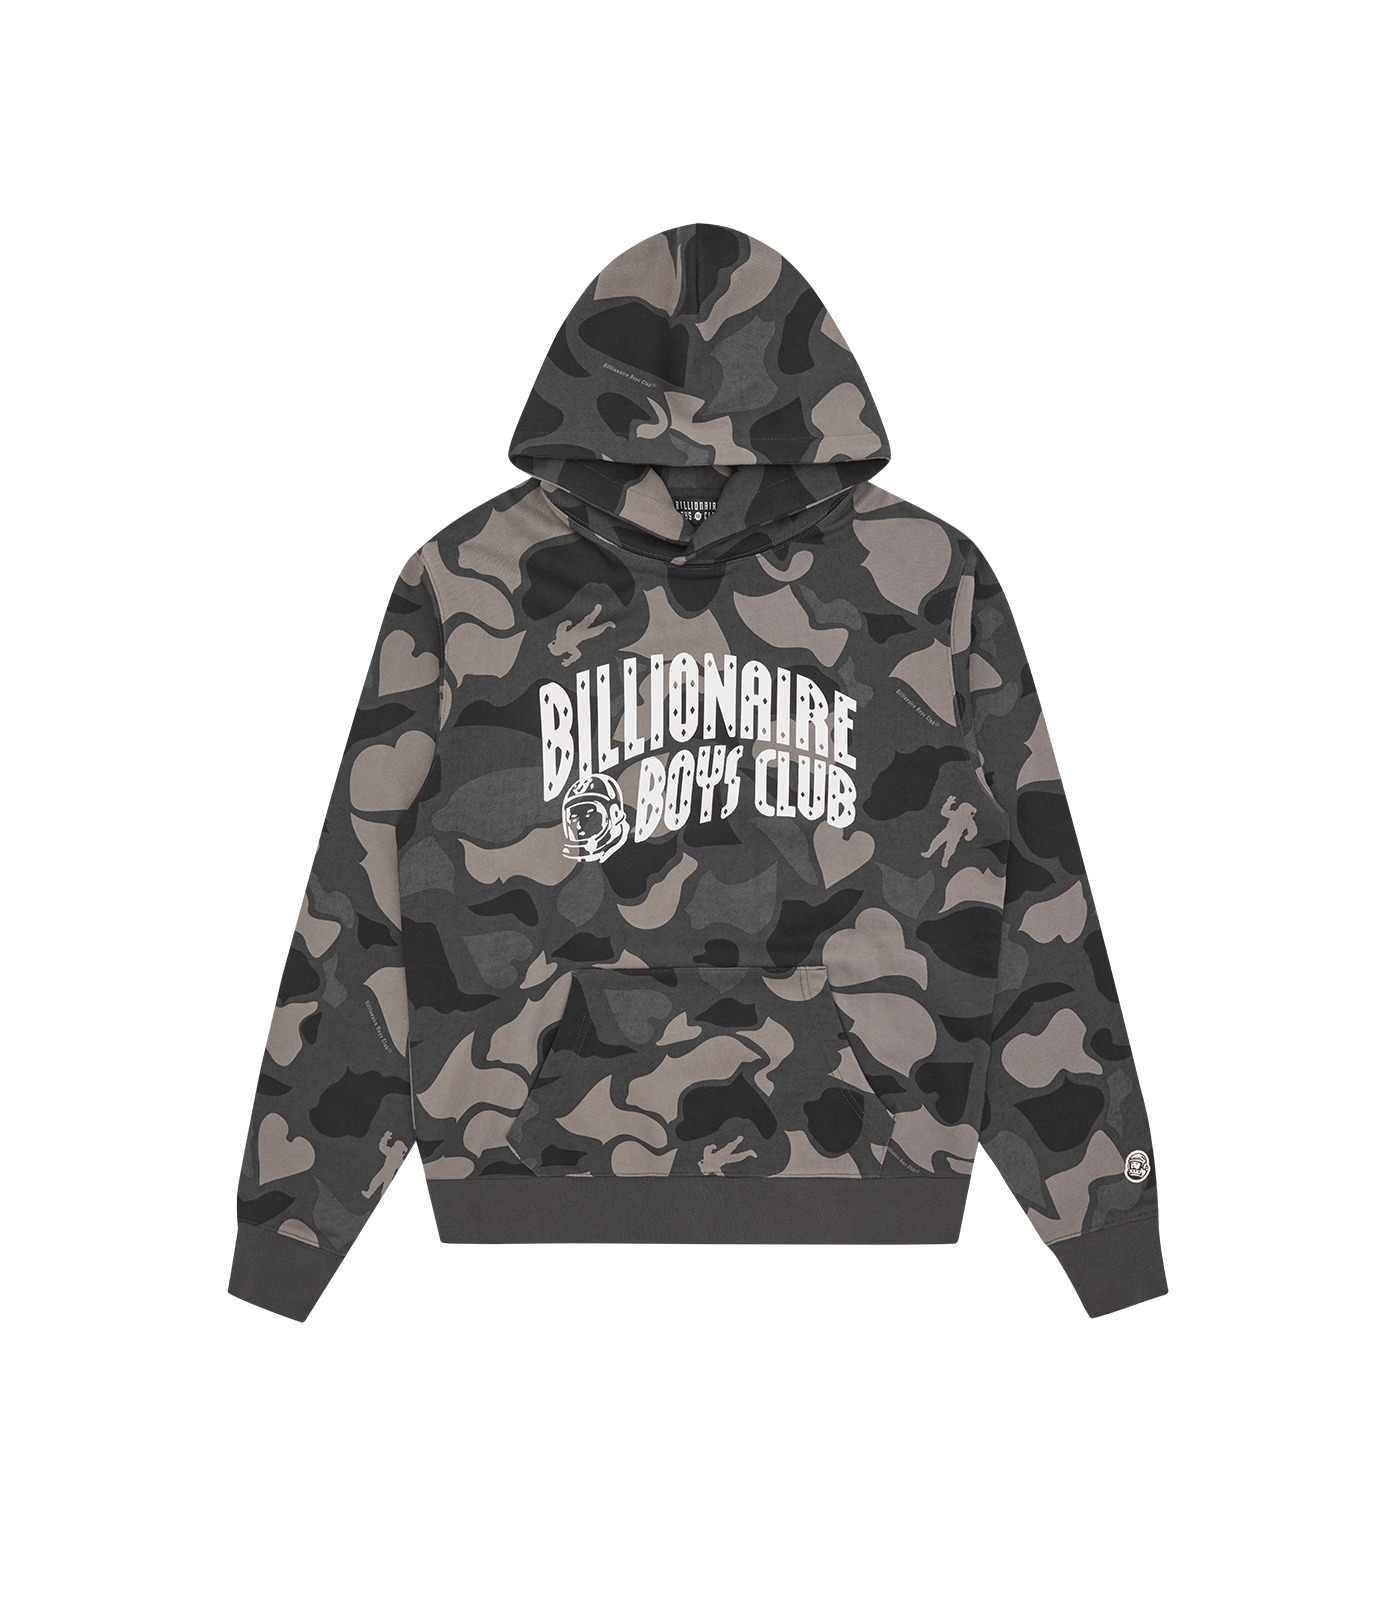 Replying to @Covered In Bling Boutique hoodie game on a million!! #svg